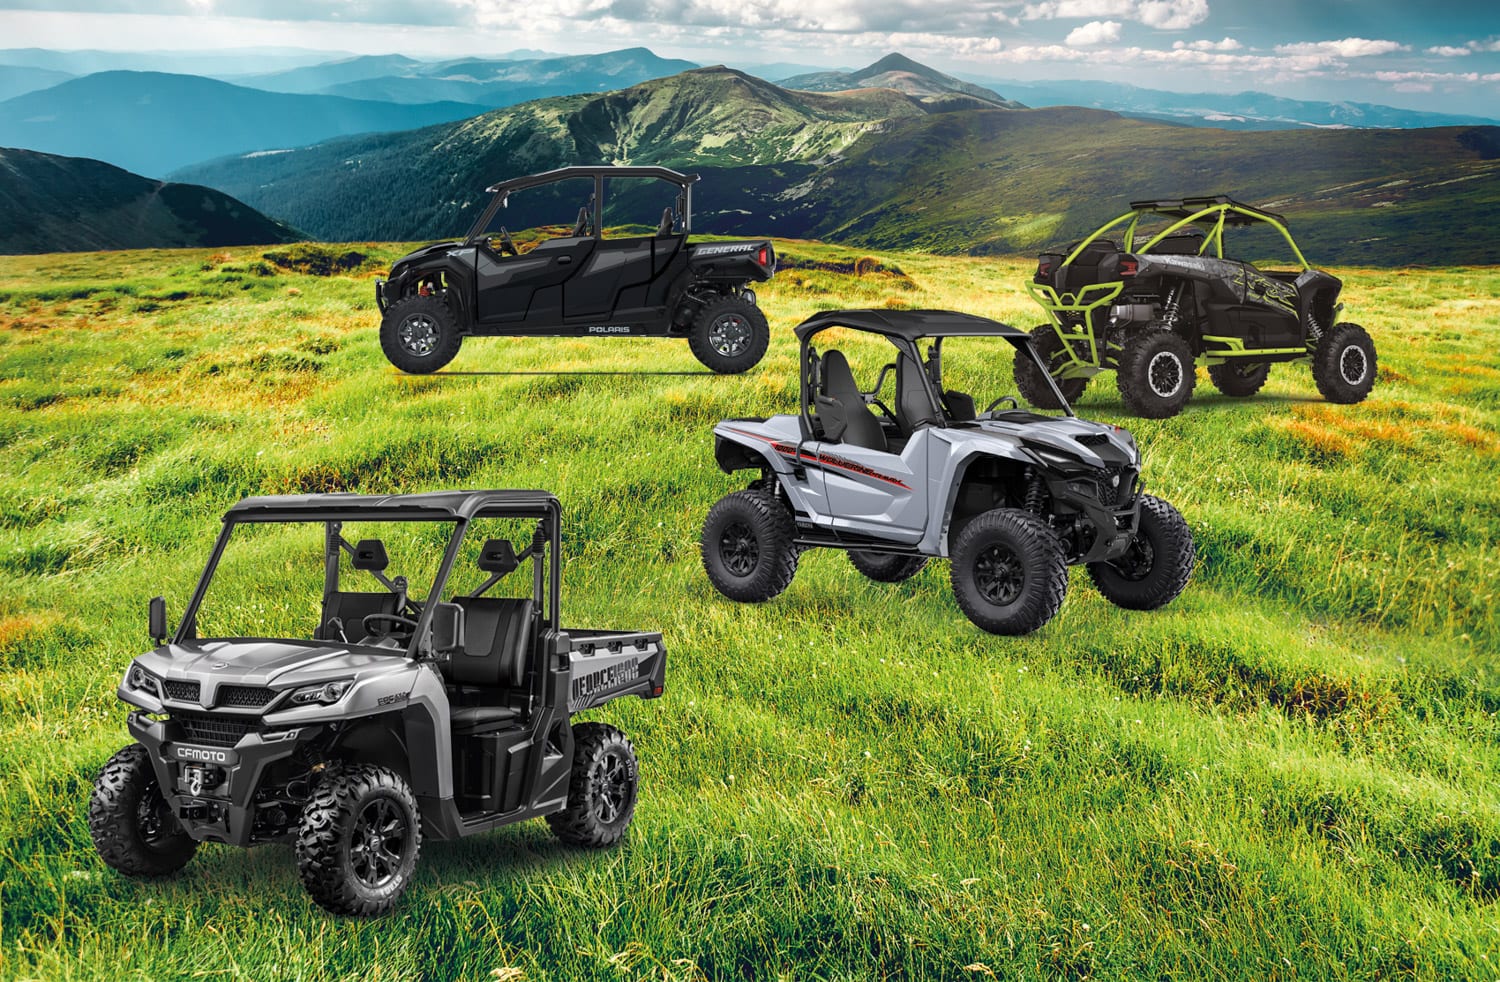 The New Breed of Crossover UTVs